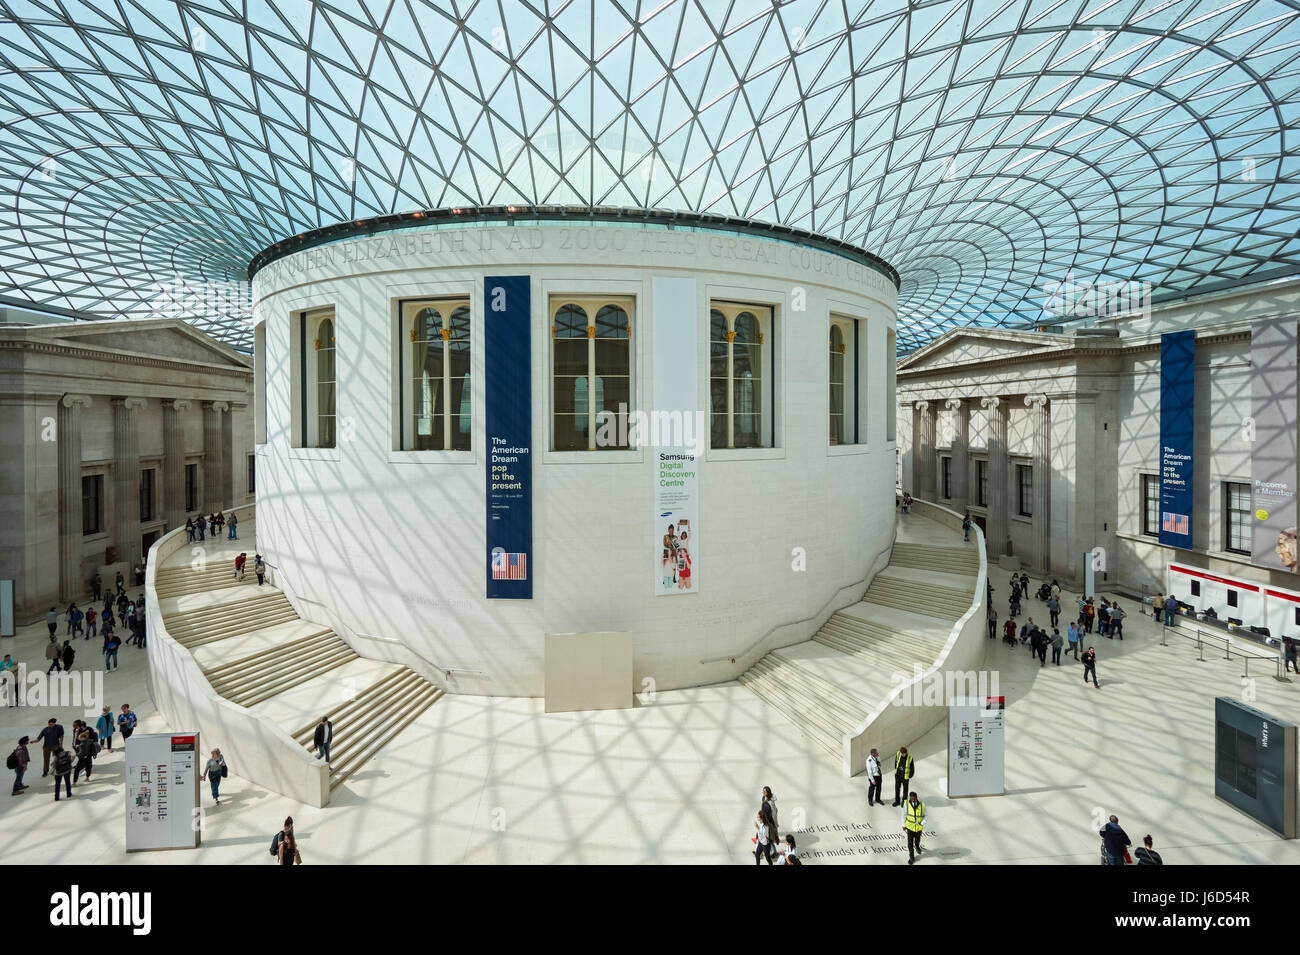 The Queen Elizabeth II Great Court at the British Museum, London England United Kingdom UK Stock Photo